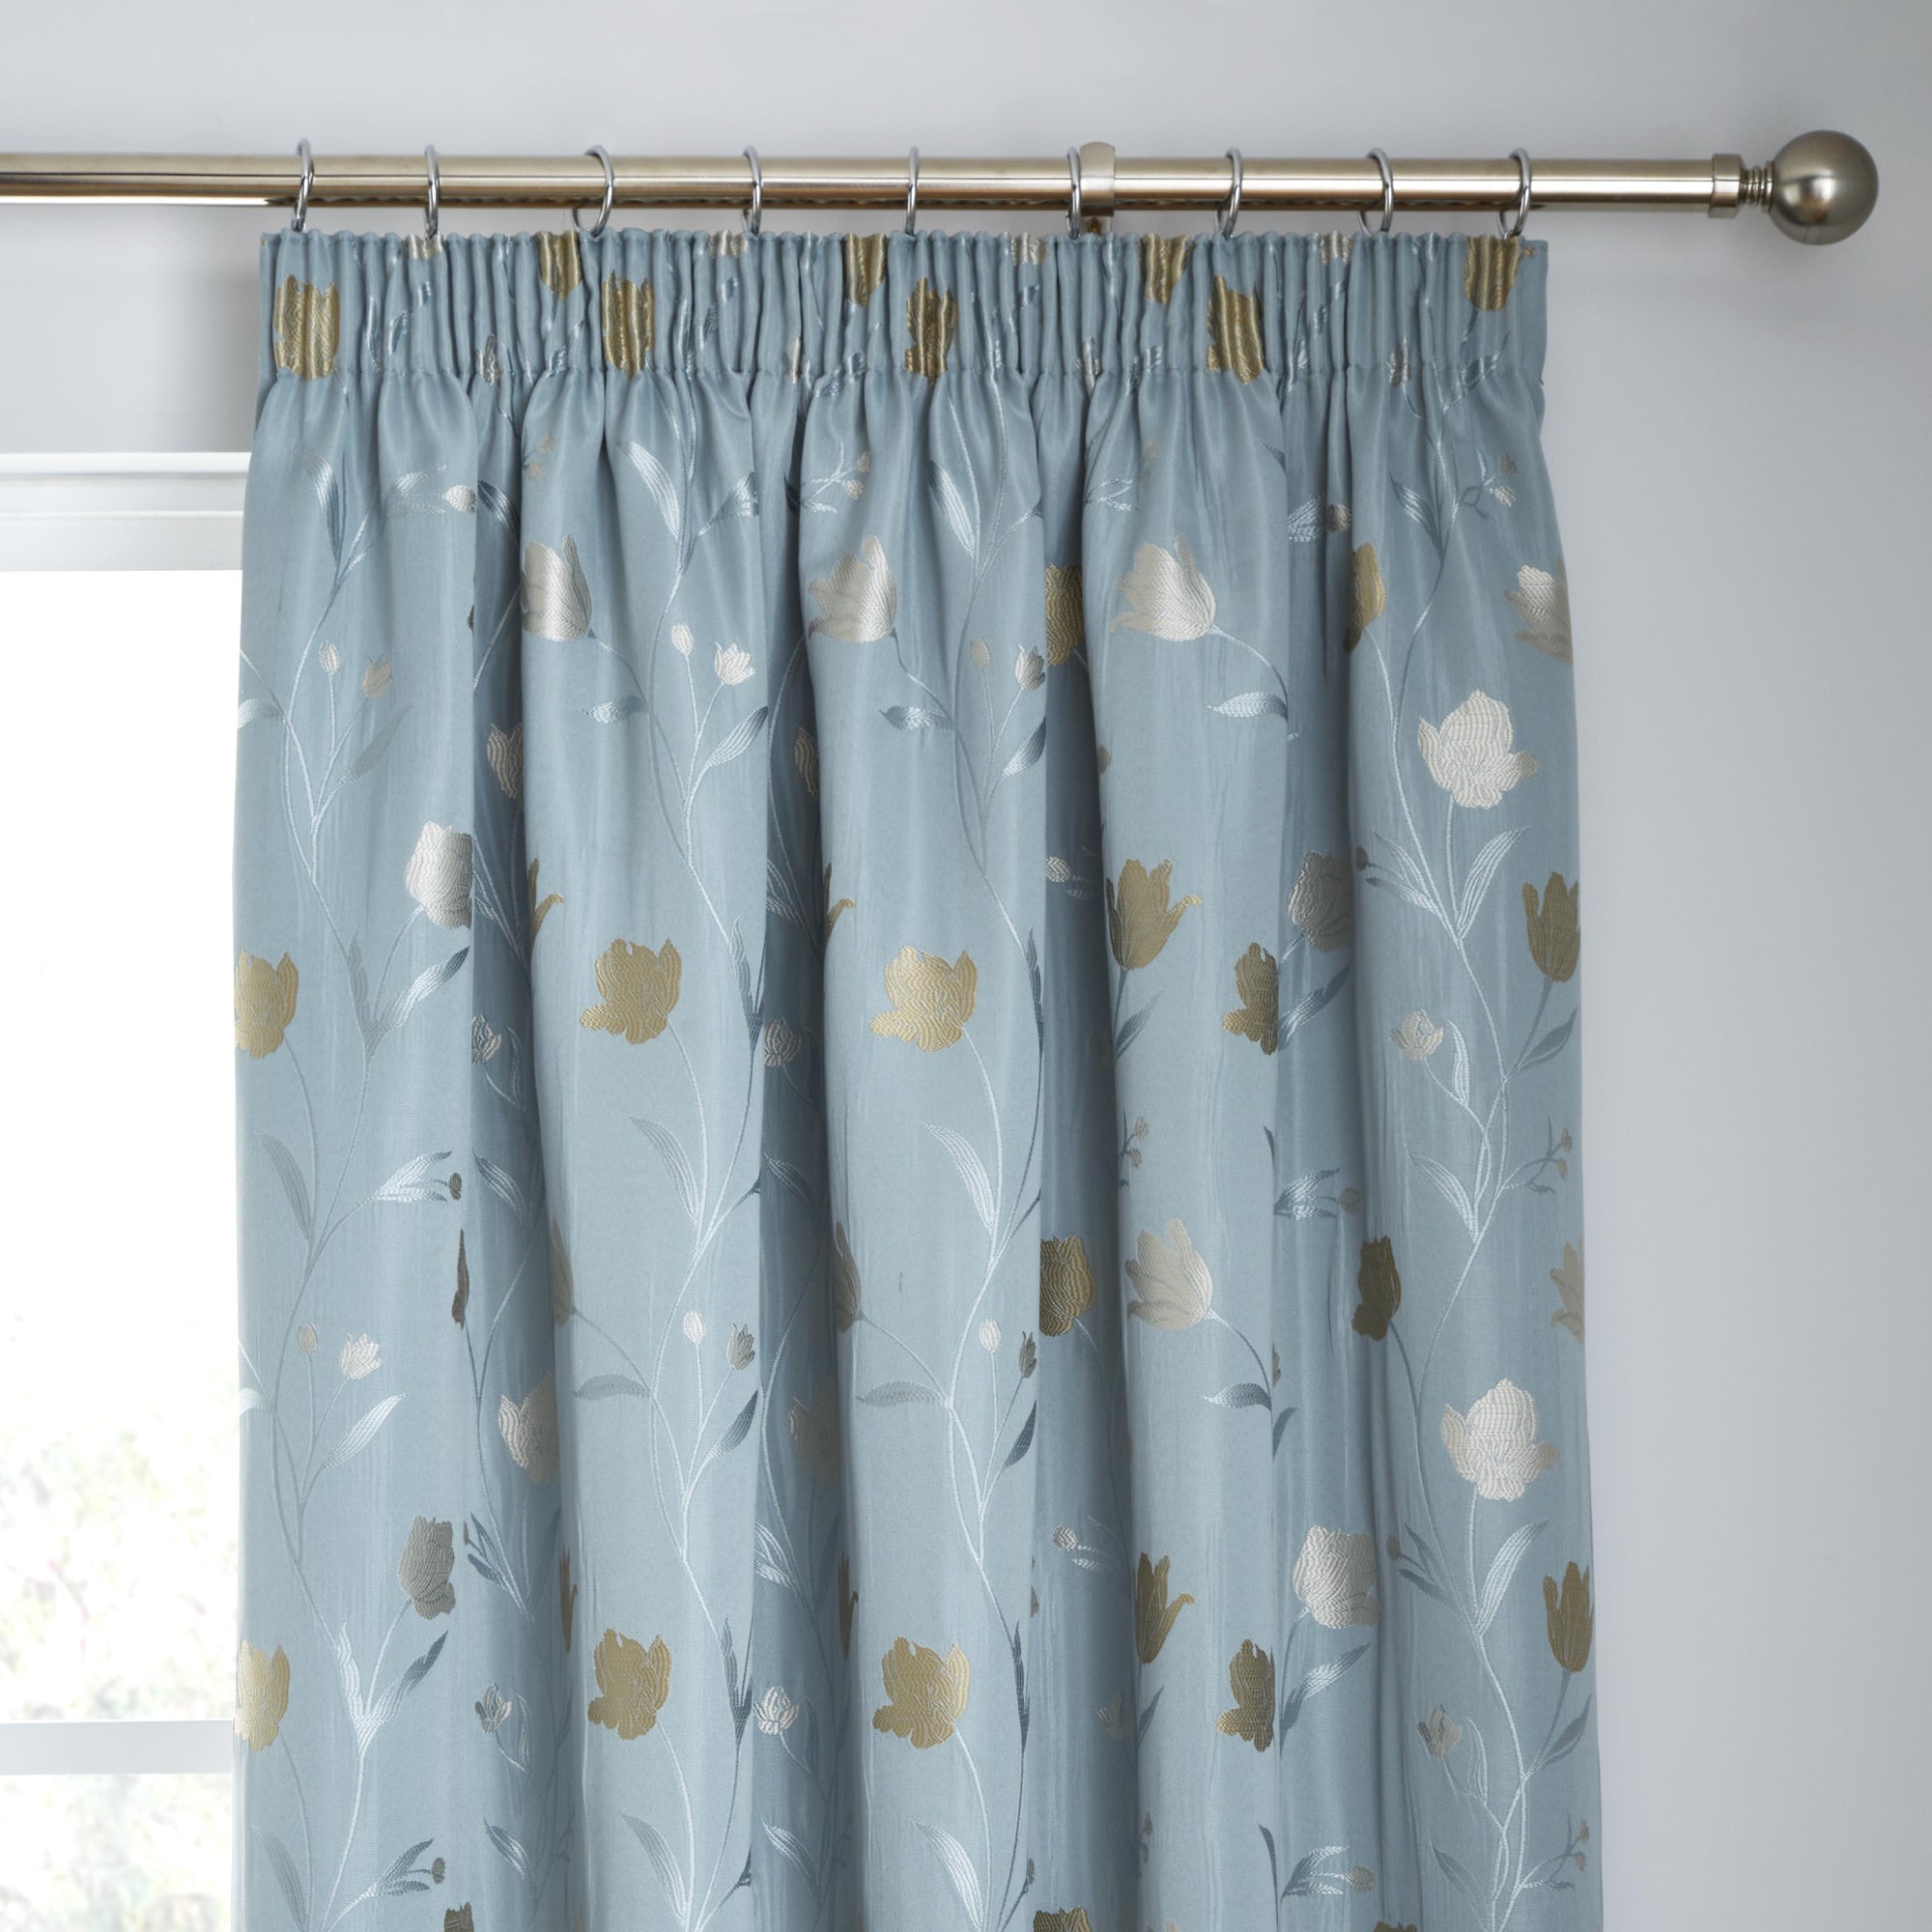 Pair of Pencil Pleat Curtains Juliette by Curtina in Duckegg